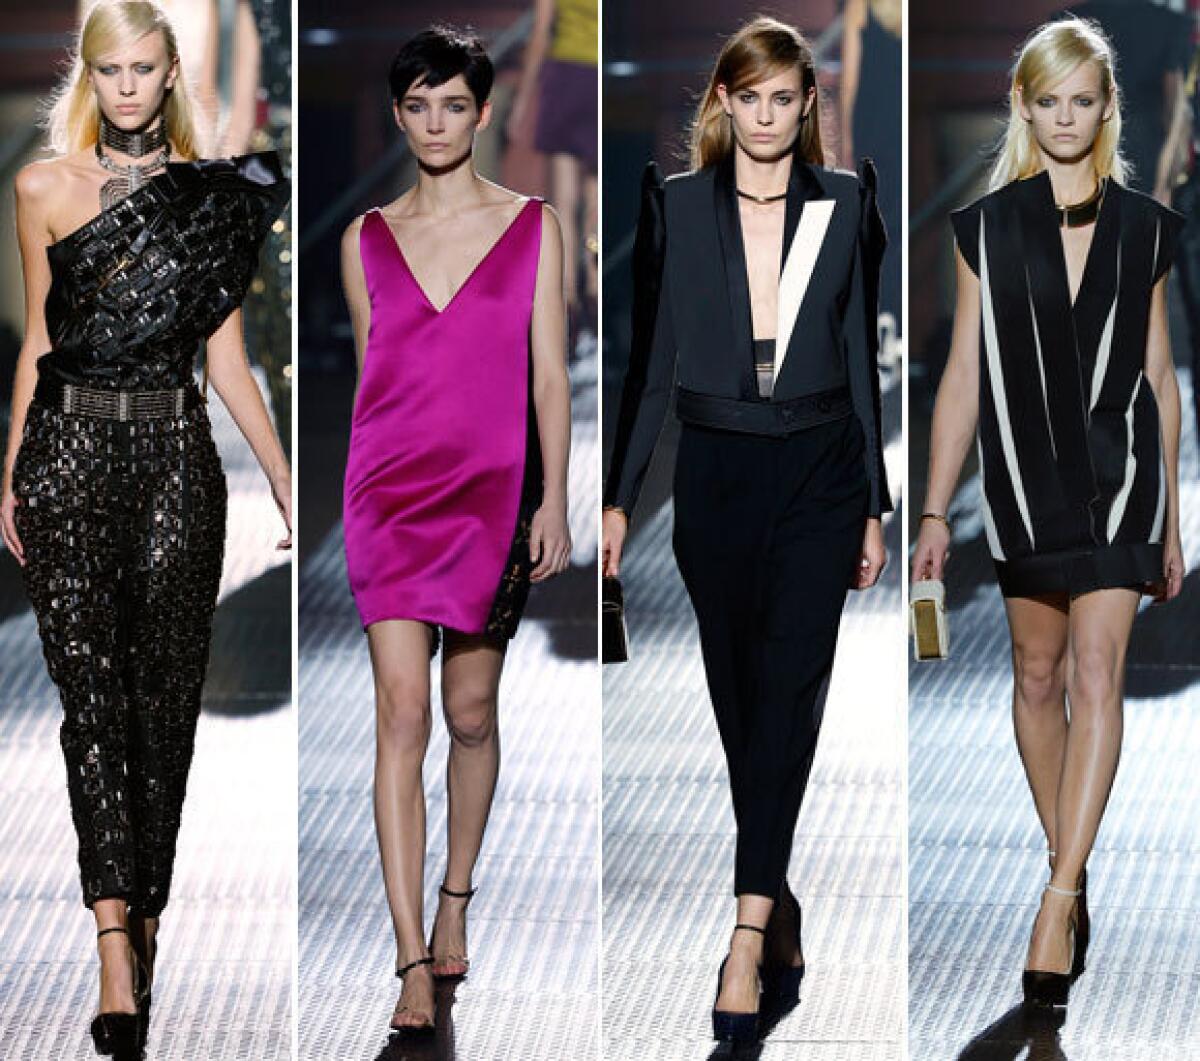 Looks from the Lanvin spring-summer 2013 collection shown during Paris Fashion Week.